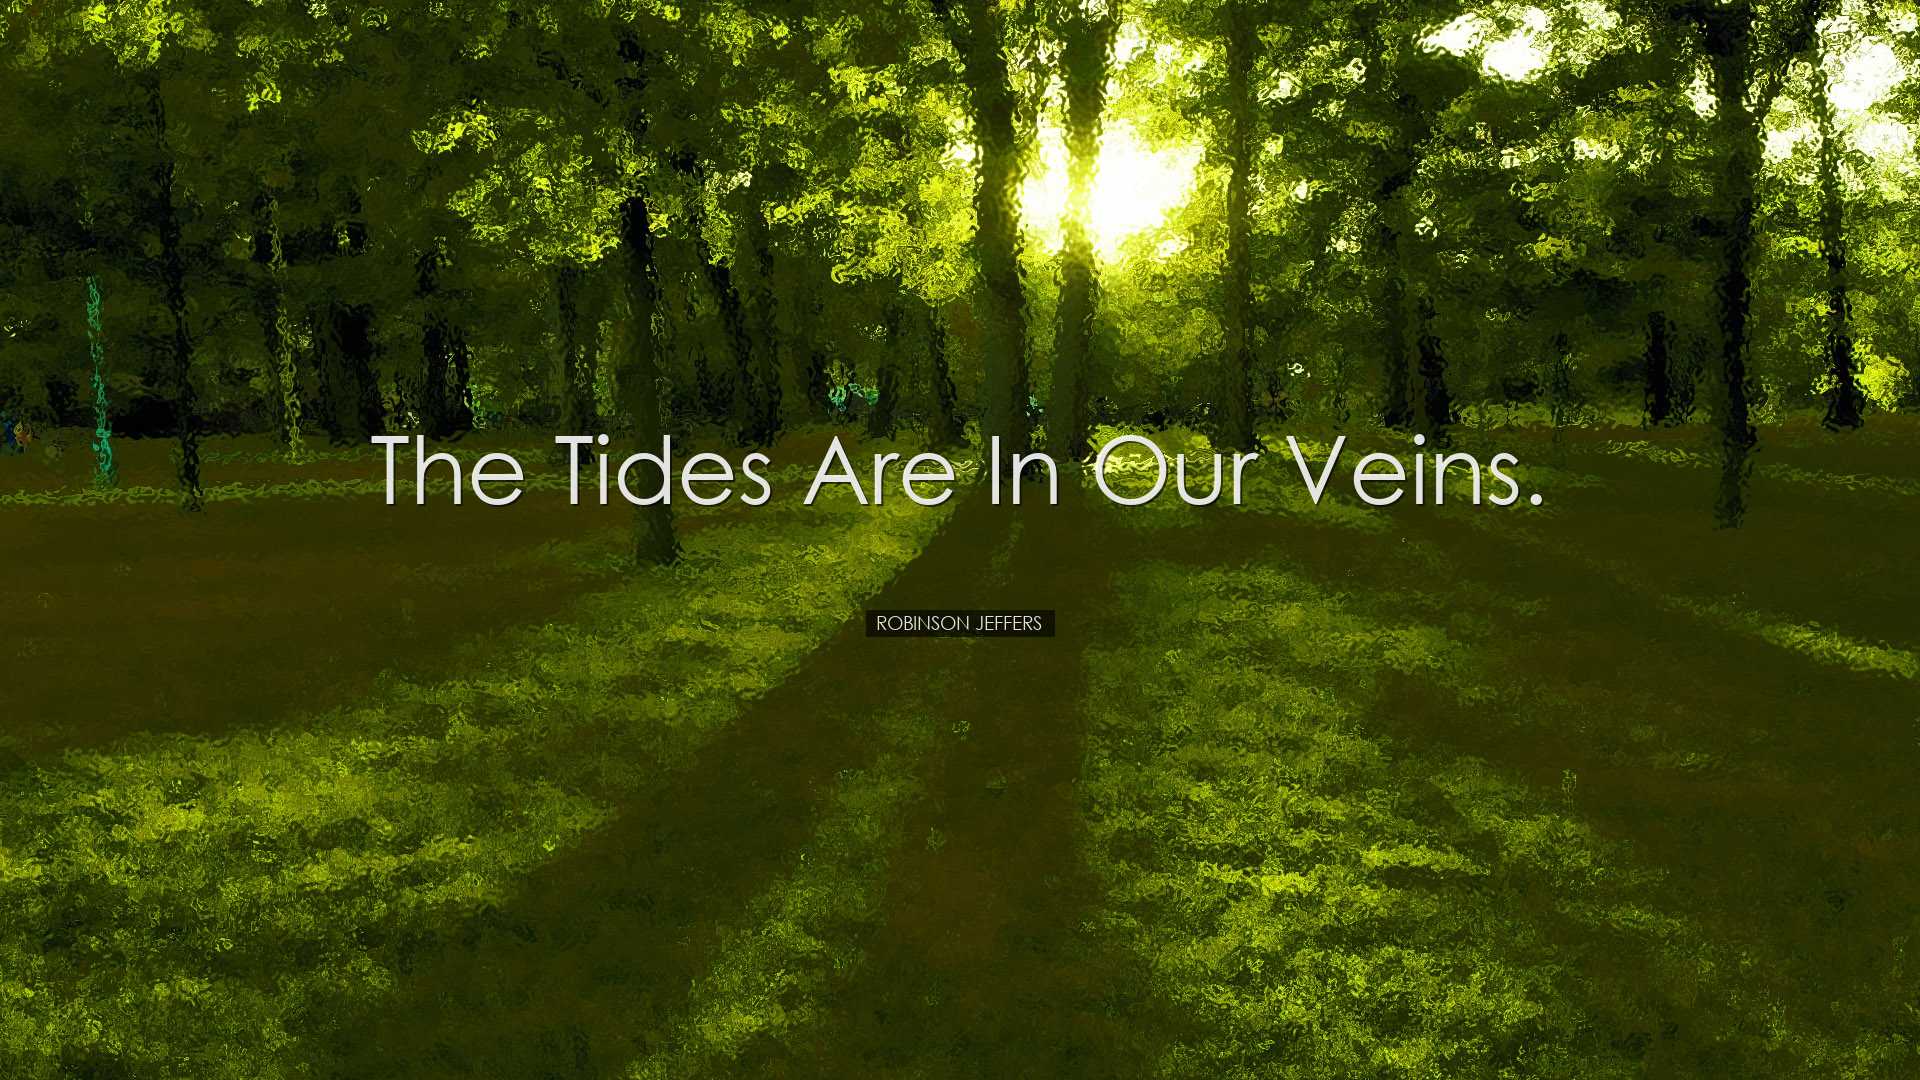 The tides are in our veins. - Robinson Jeffers